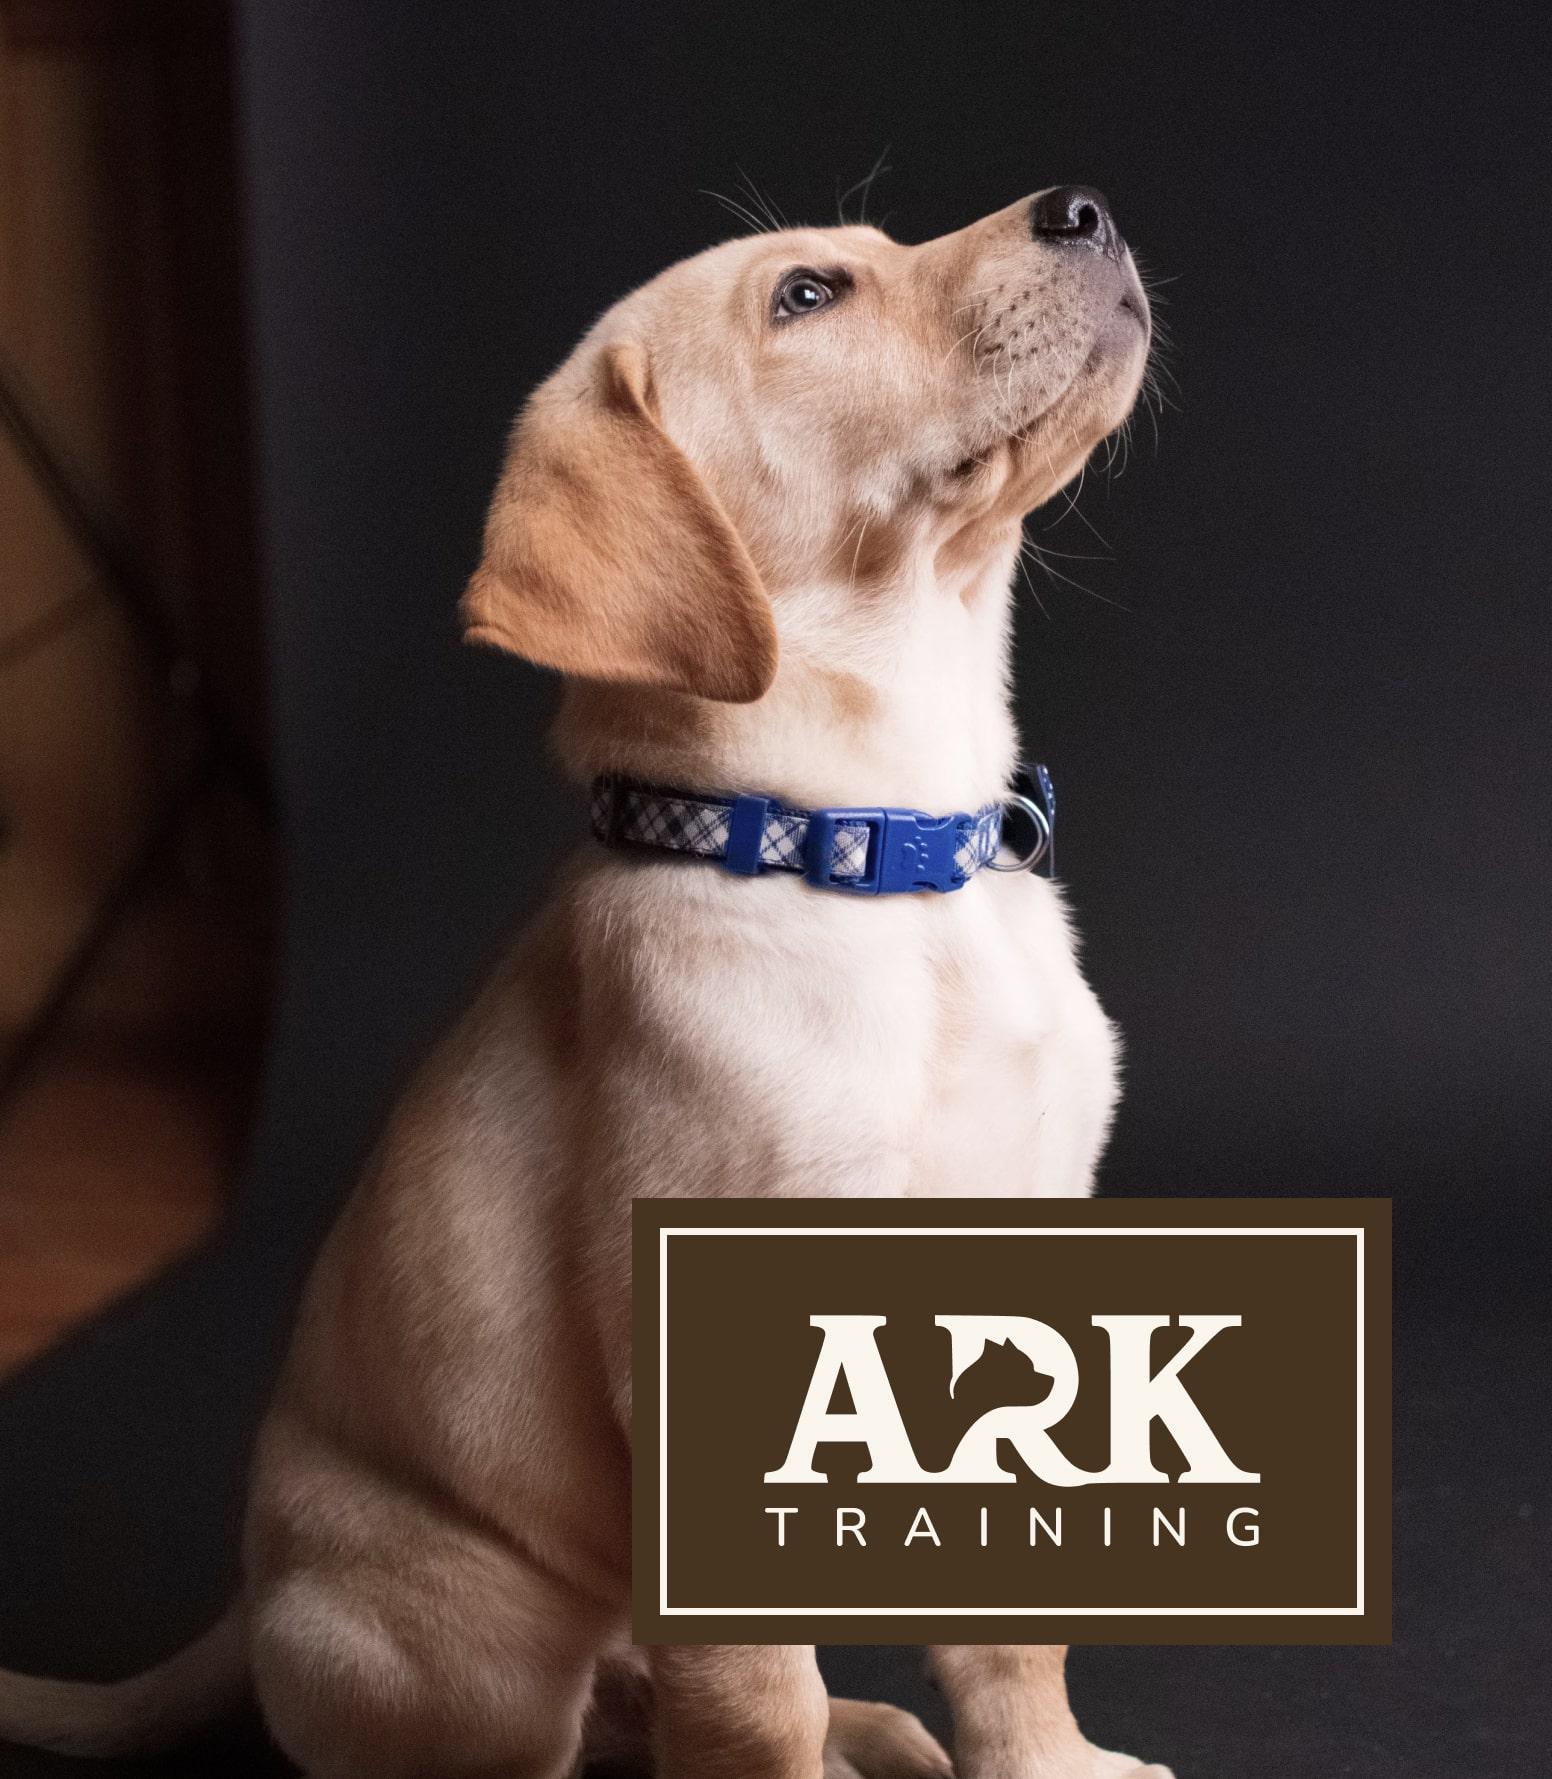 Logo design for a dog training academy, featuring a clean and impactful design with a dog and whistle. This logo represents the precision and authority of professional dog training services, suitable for a wide range of digital platforms